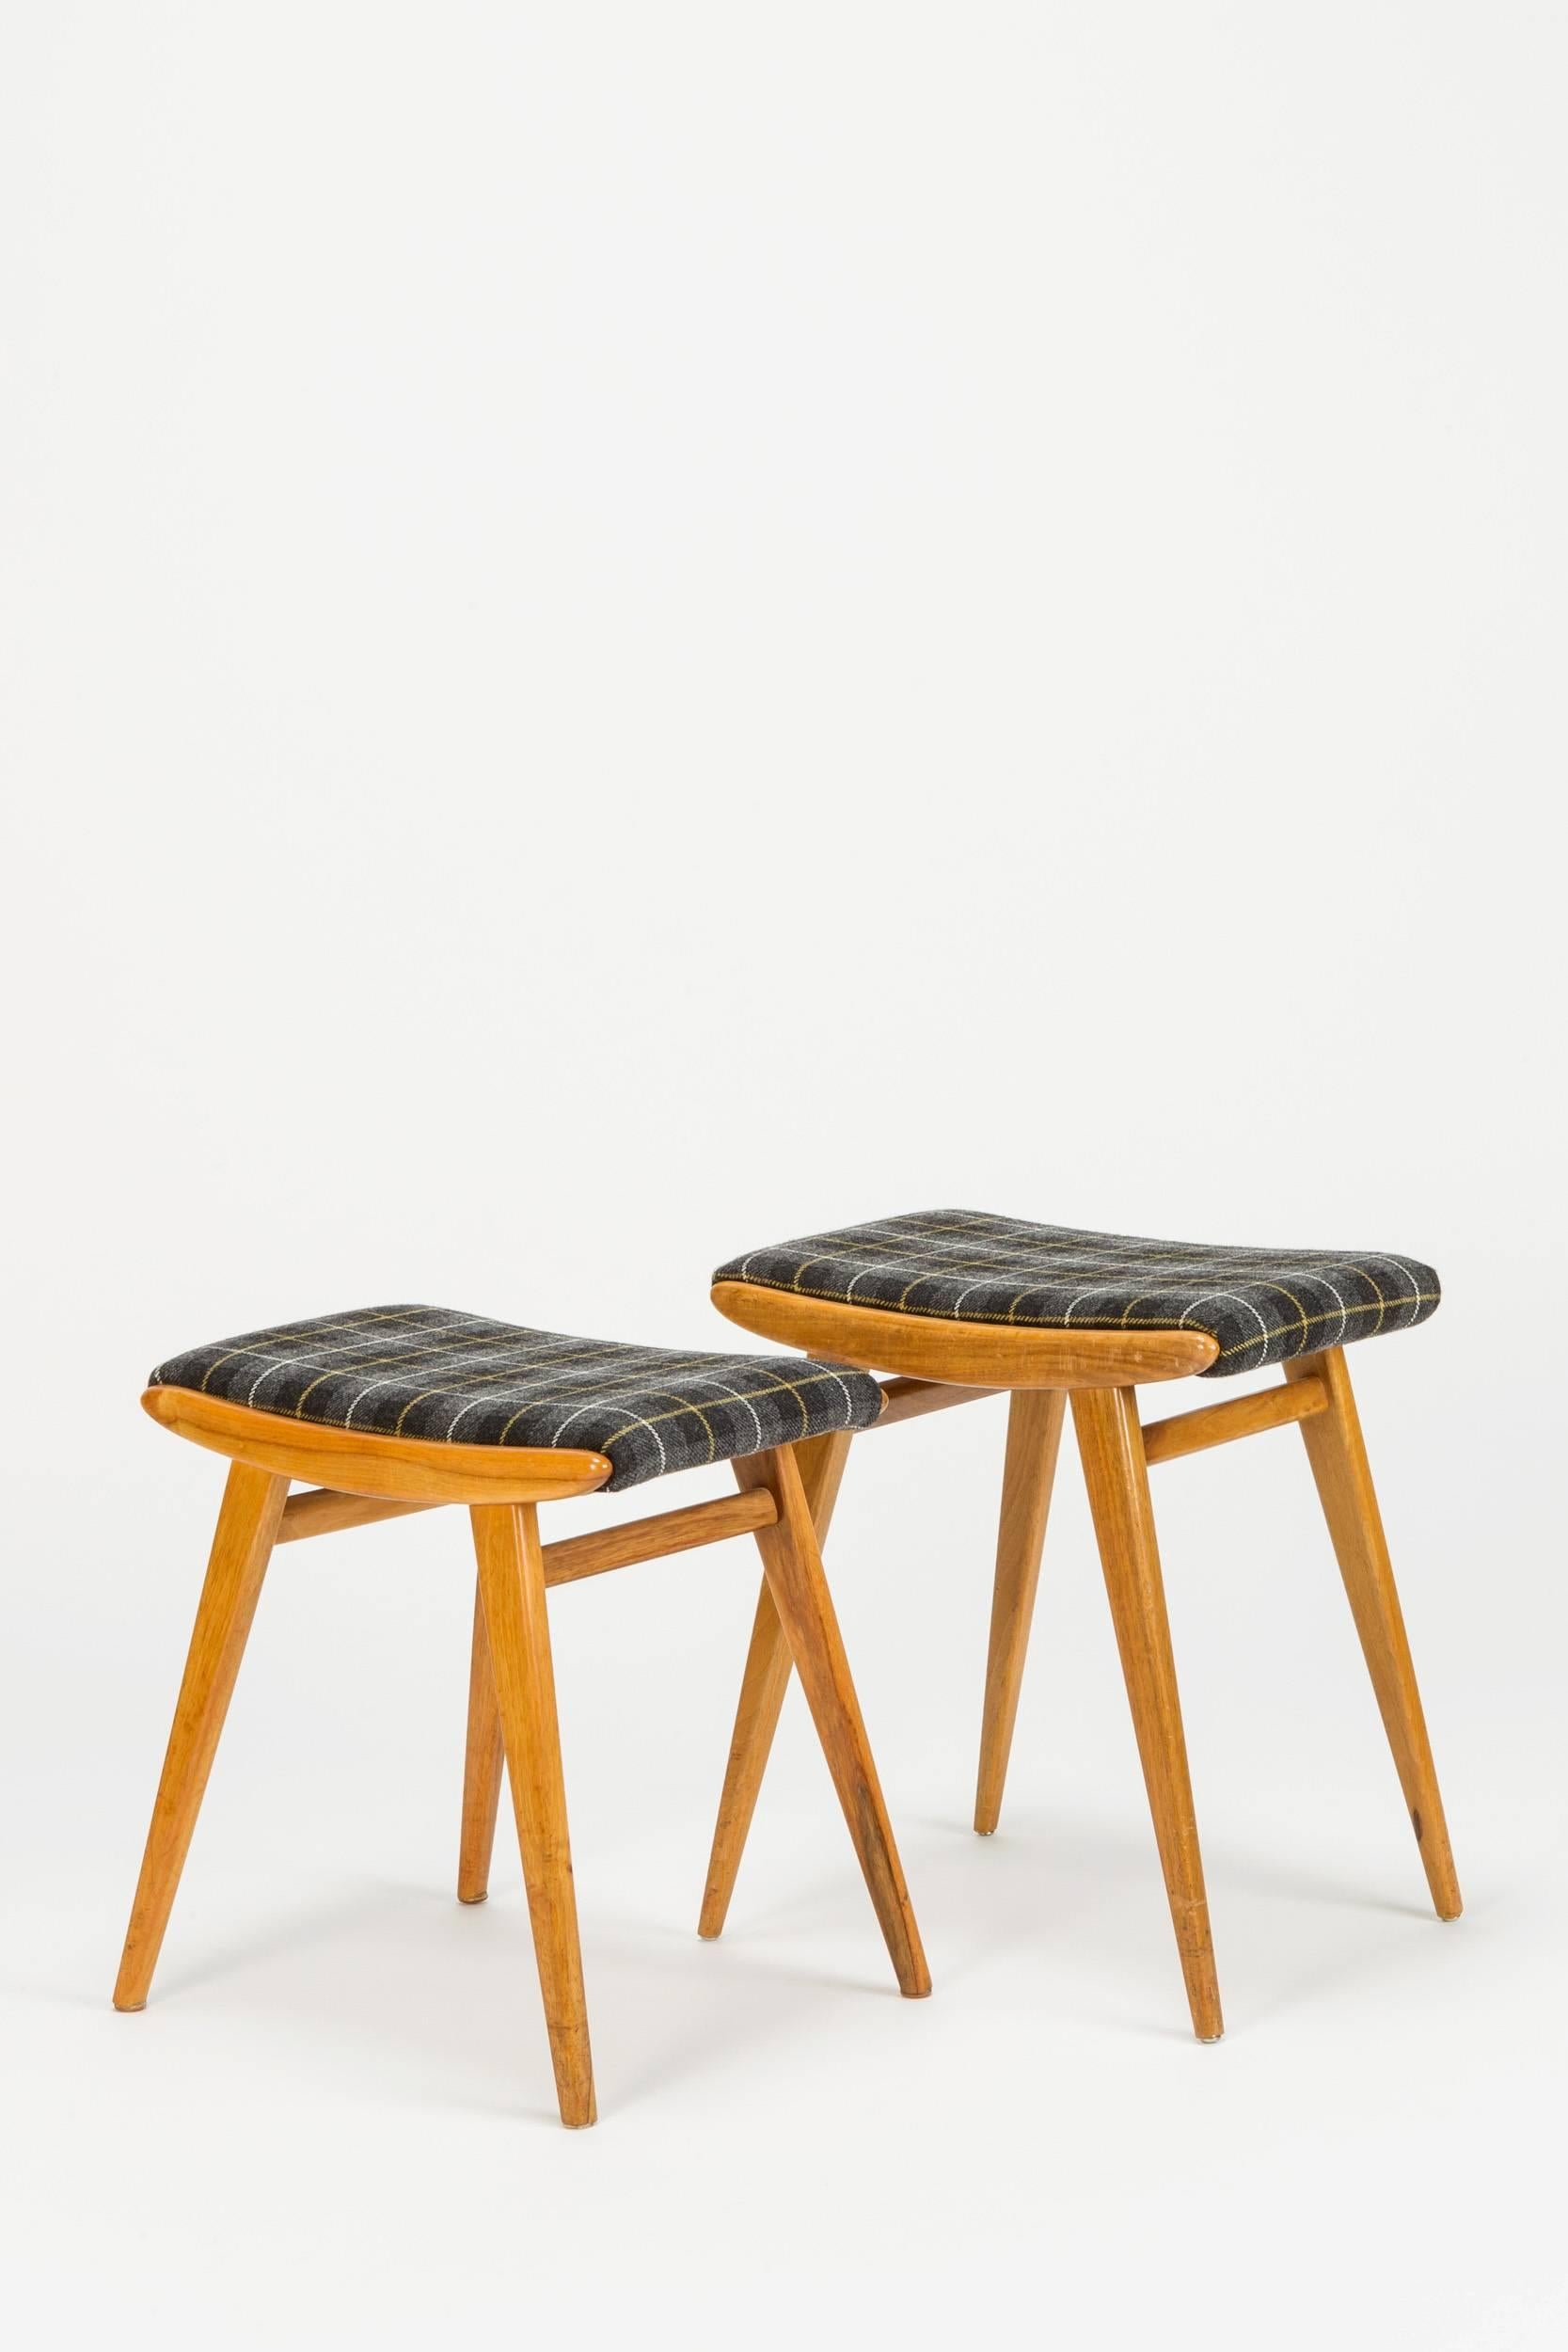 Pair of solid walnut stools by Jens Risom for H.G. Knoll in Germany in the 1940s. They were new covered with a wonderful Scottish check fabric in wool.